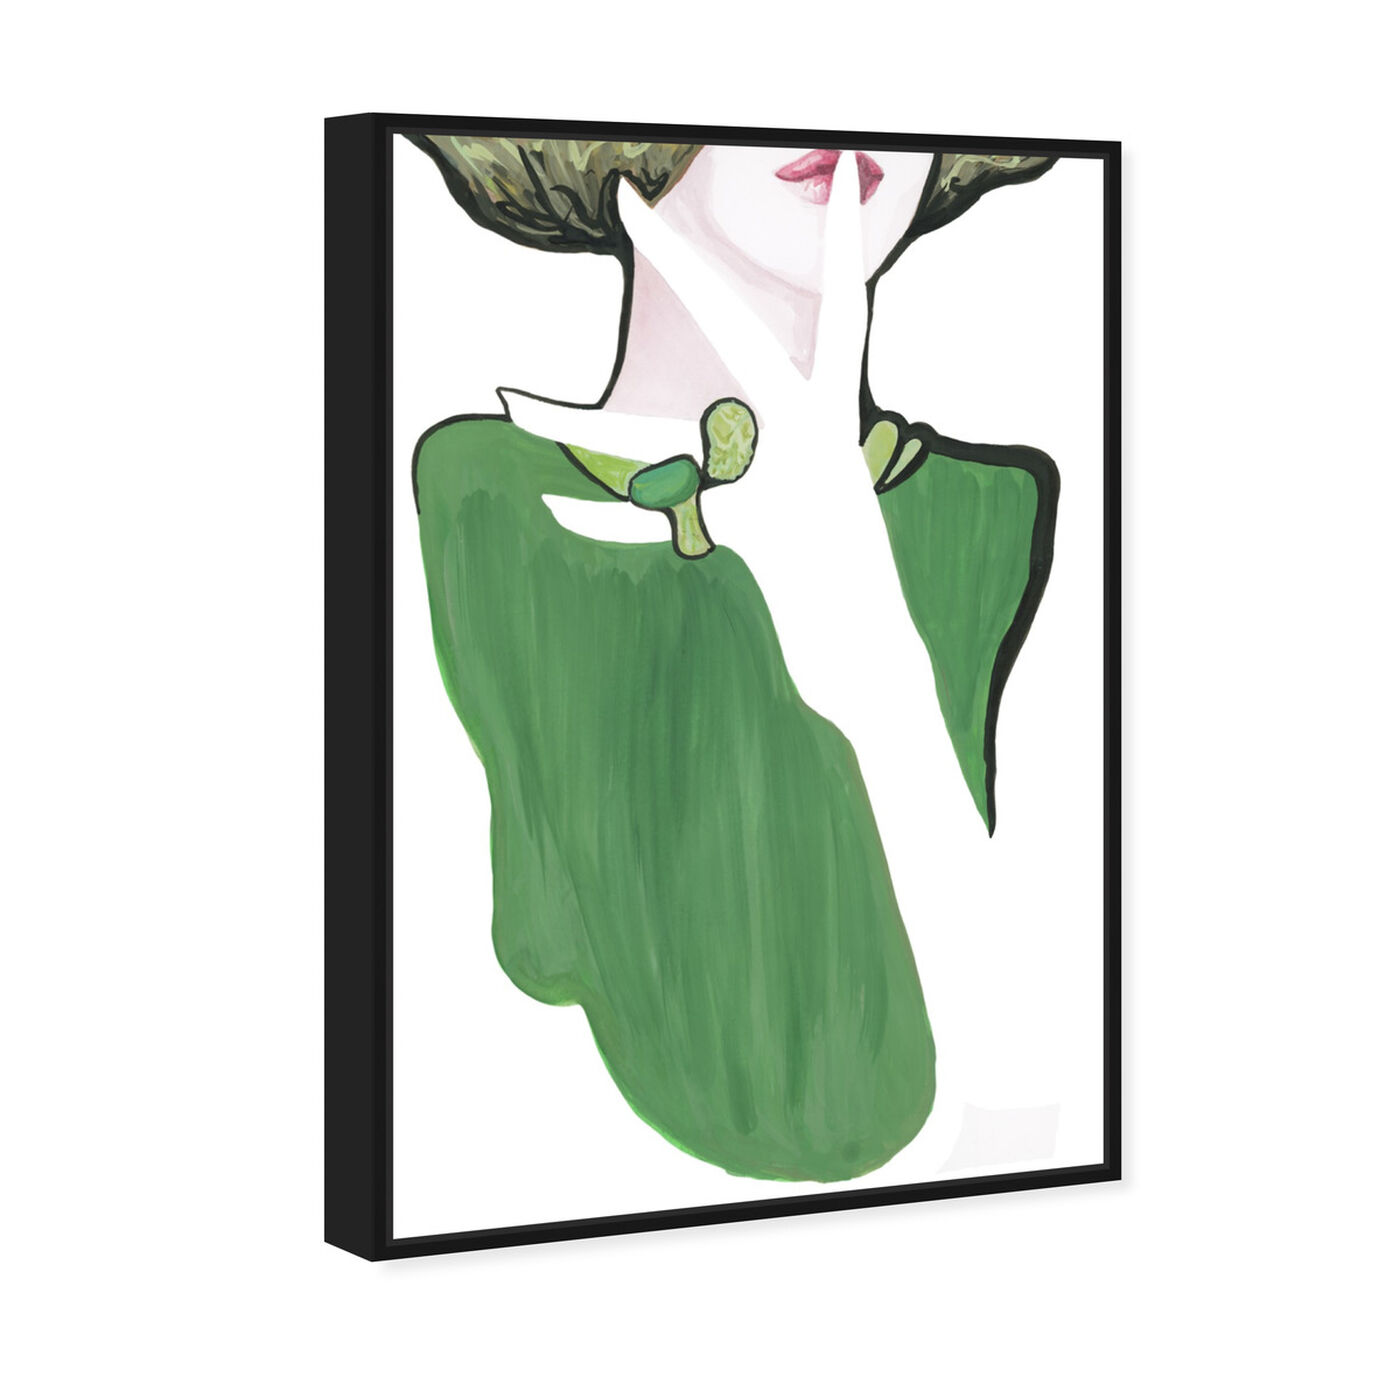 Angled view of Jade - Gill Bay featuring fashion and glam and portraits art.